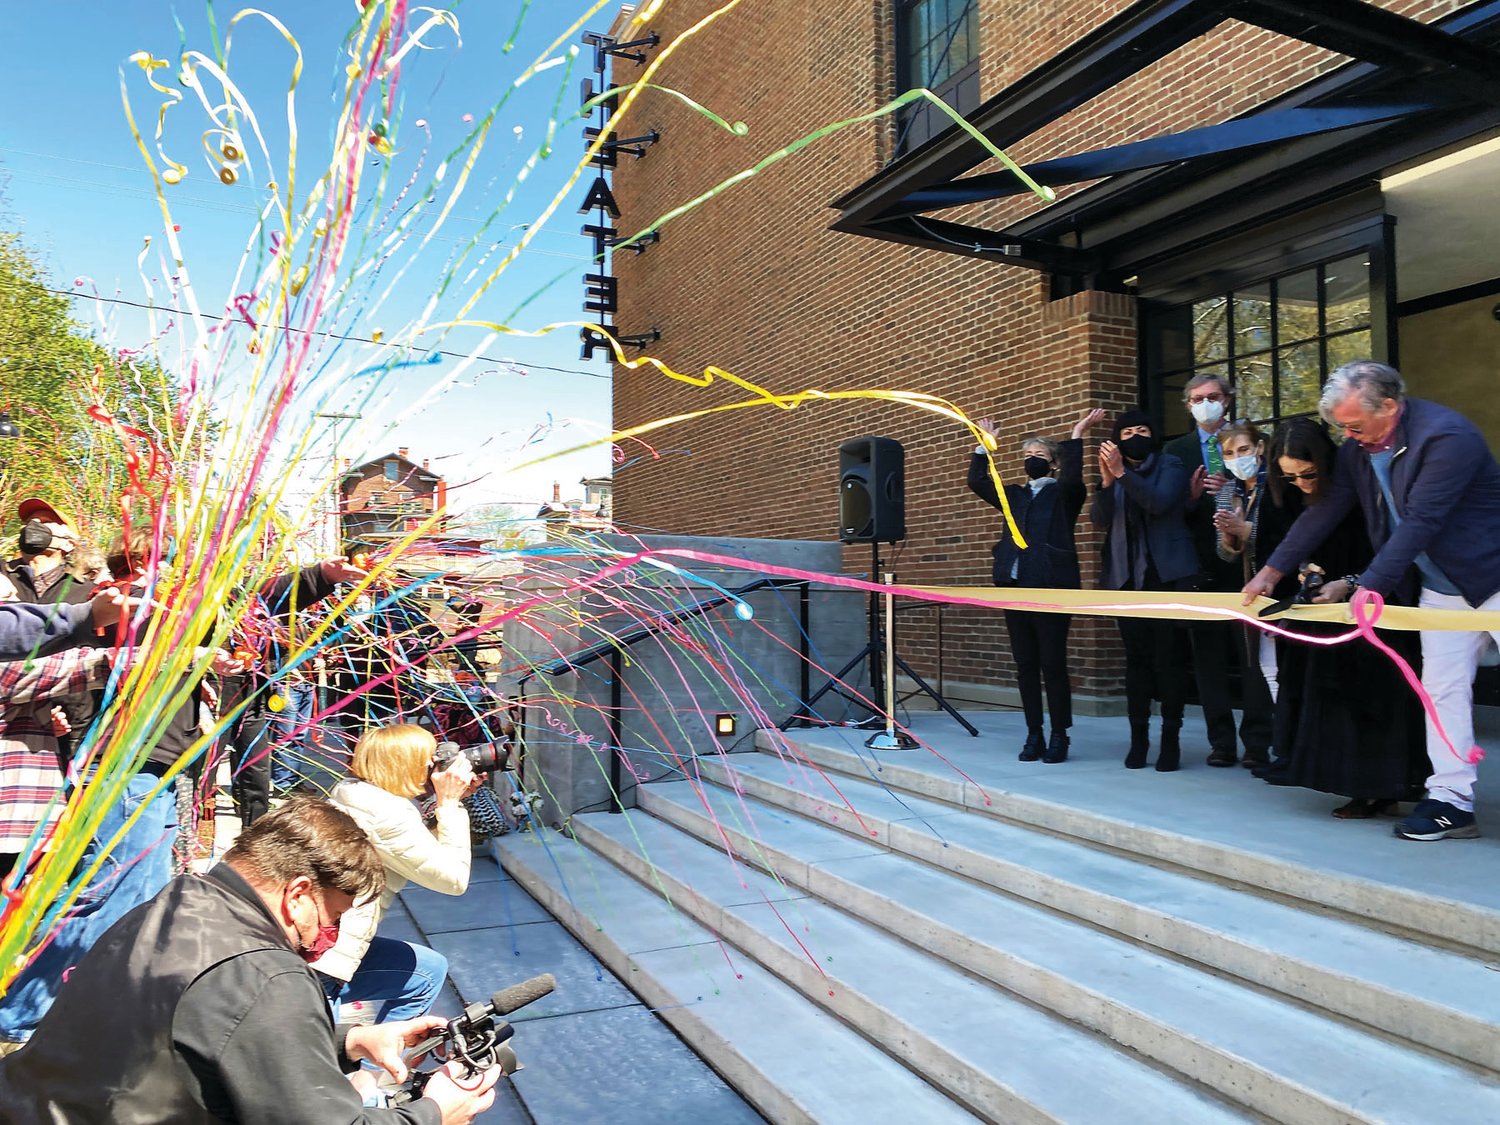 The long-awaited ribbon-cutting for ArtYard, the arts center in Frenchtown, N.J., took place May 1, with Jill Kearney and Stephen McDonnell handling the scissors.